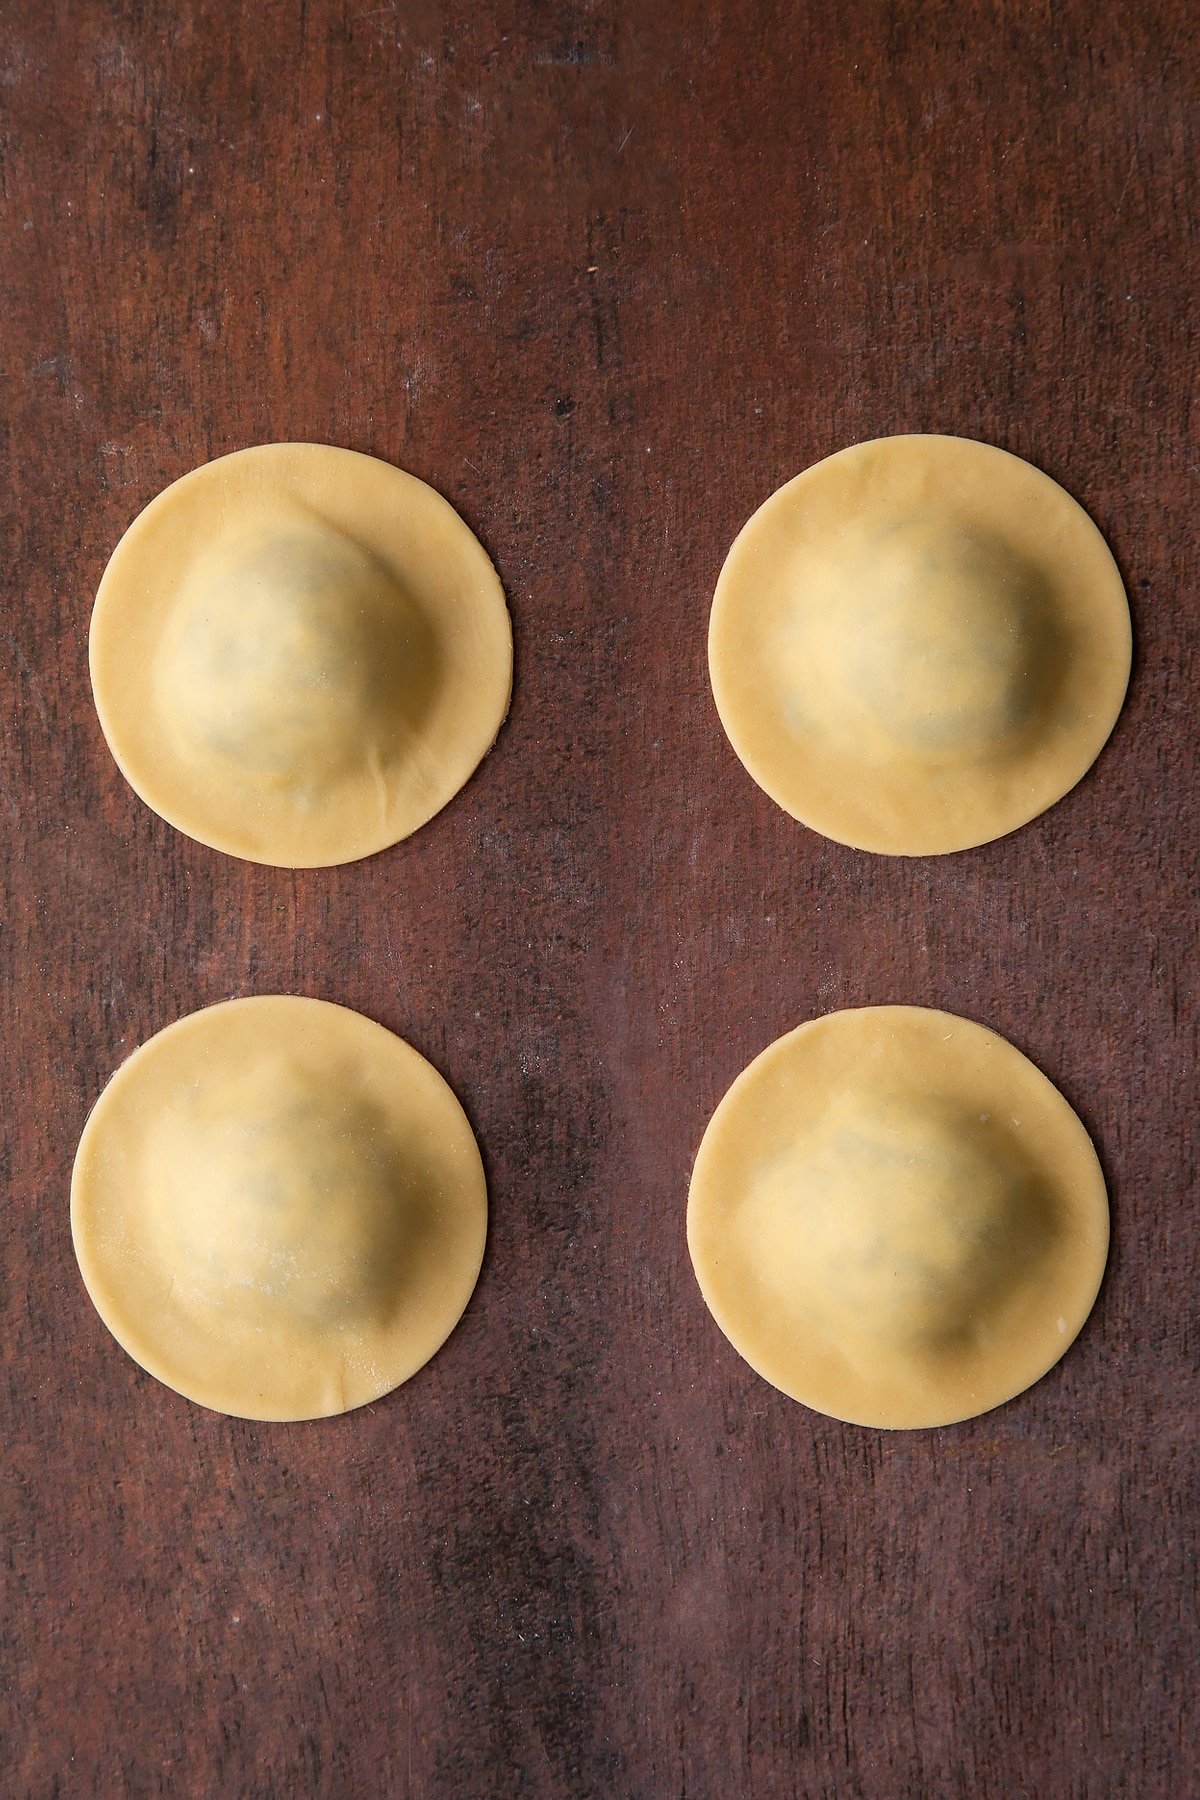 Overhead shot of the four finished ravioli pieces.